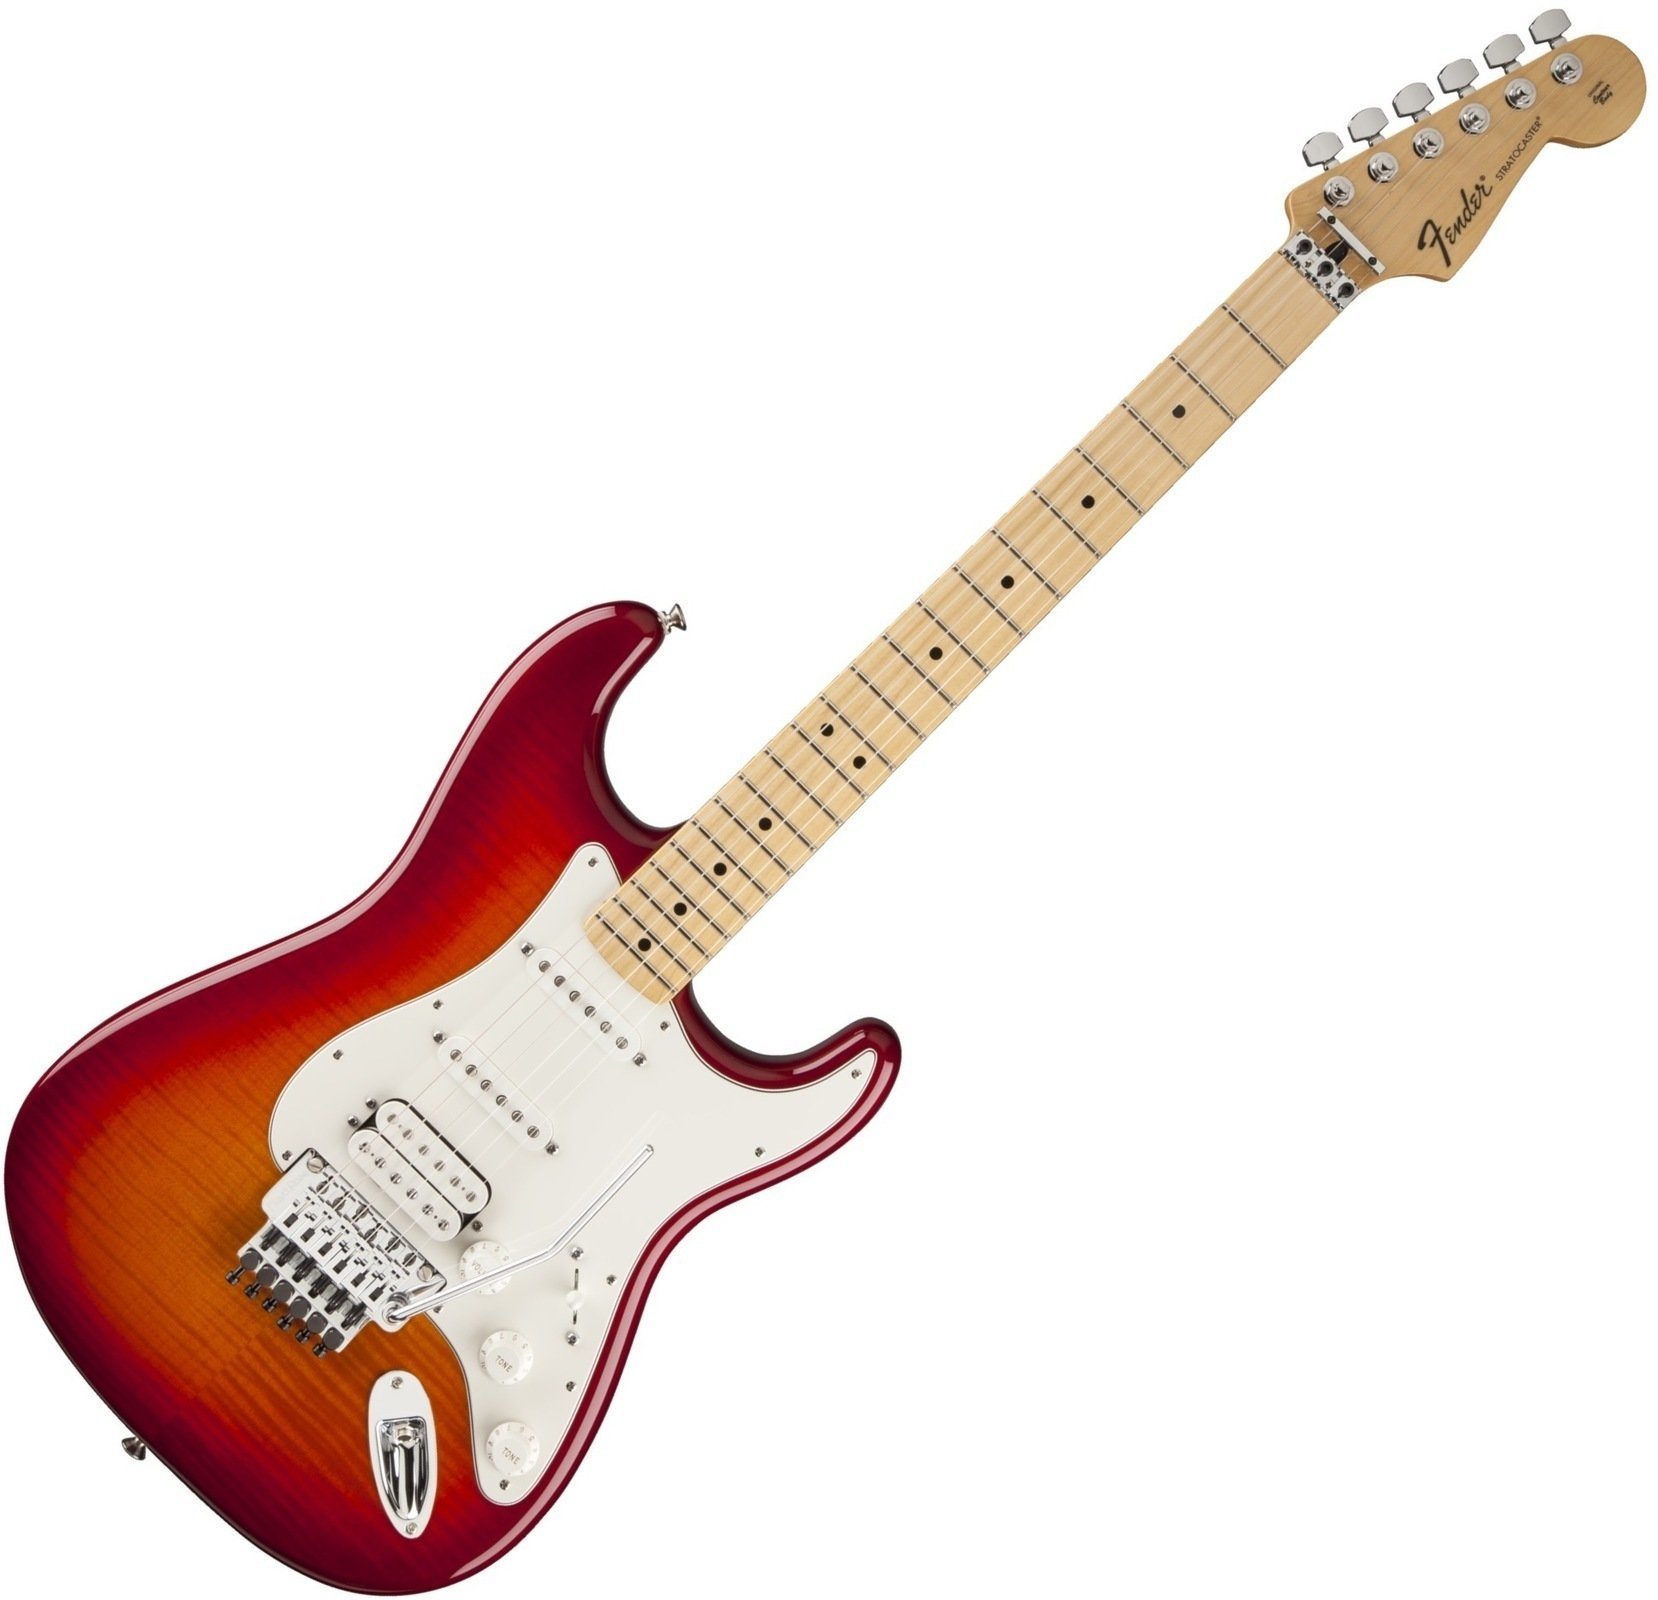 Electric guitar Fender Standard Stratocaster HSS PlusTop with Locking Tremolo, Maple F-board, Aged Cherry Burst